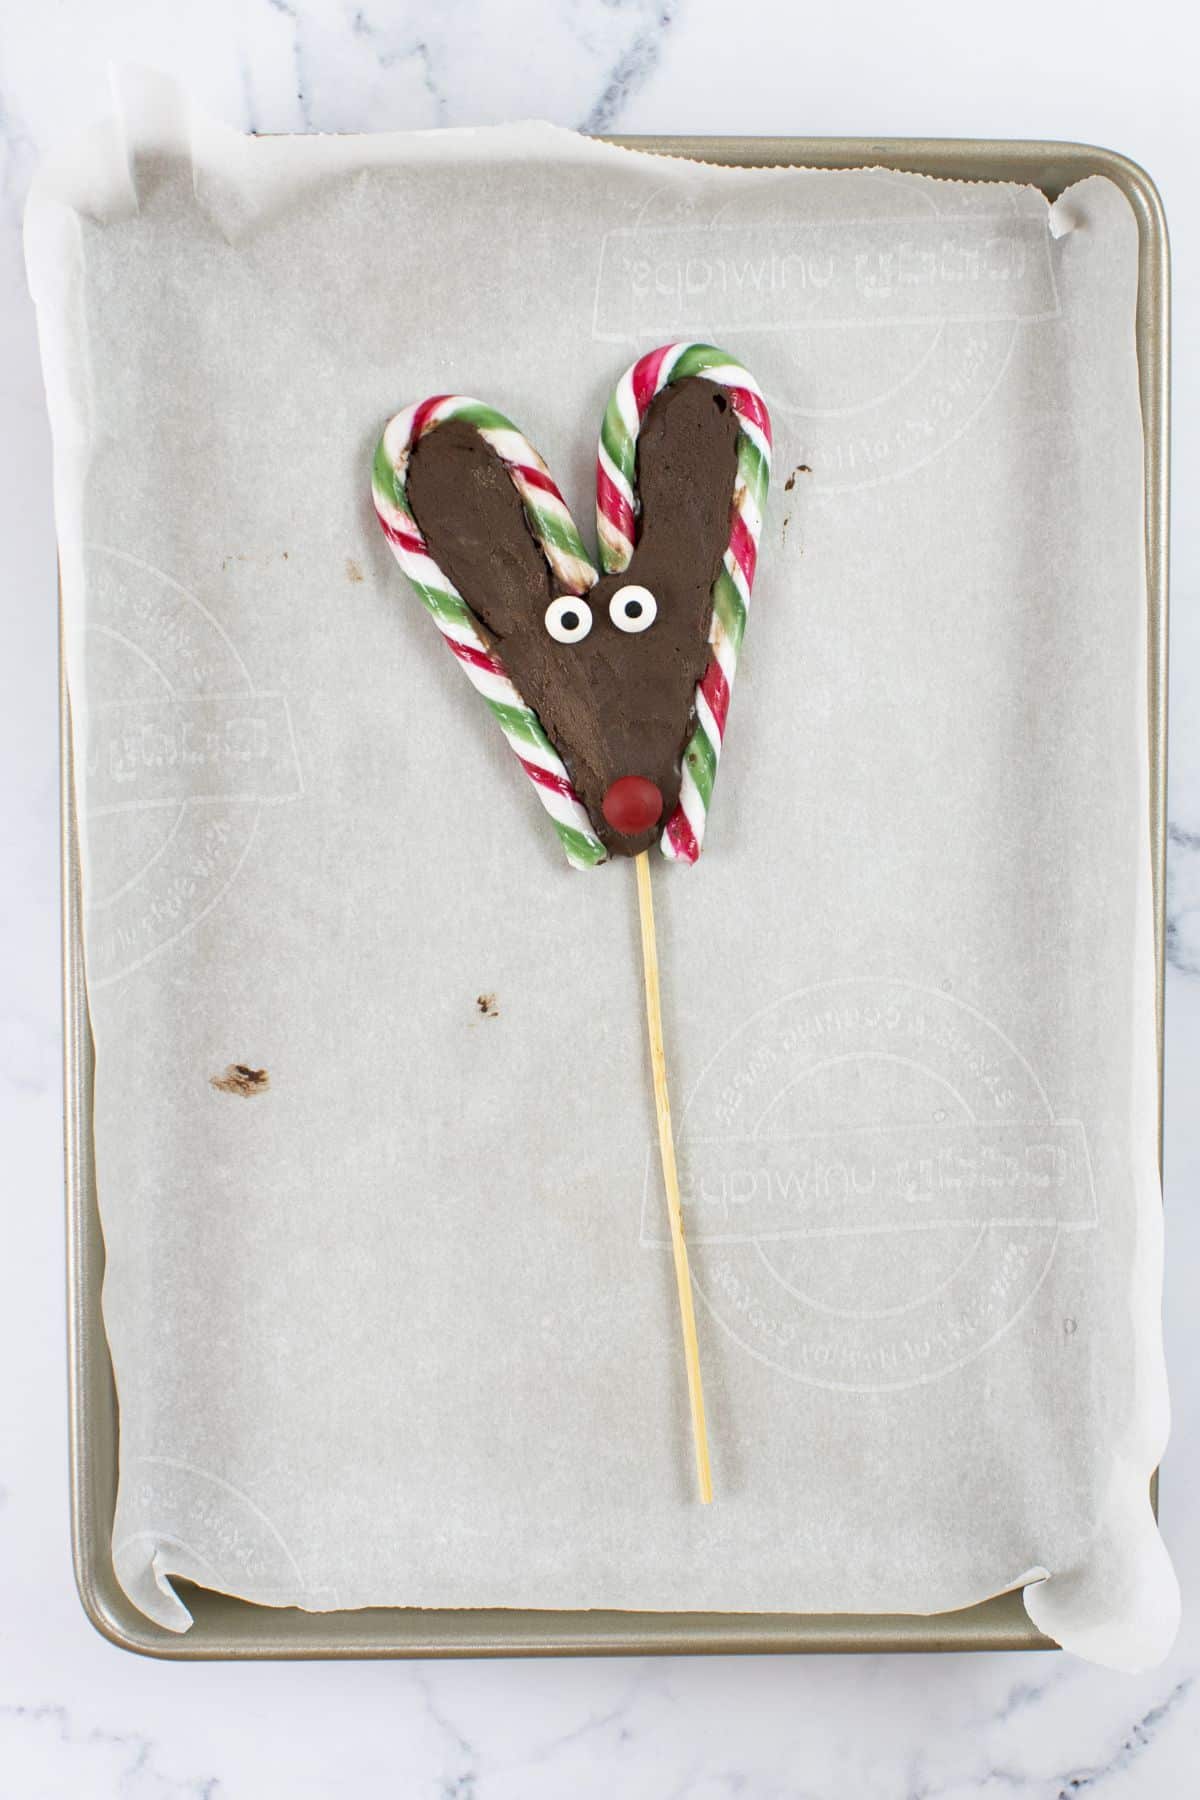 one candy cane reindeer on parchment paper